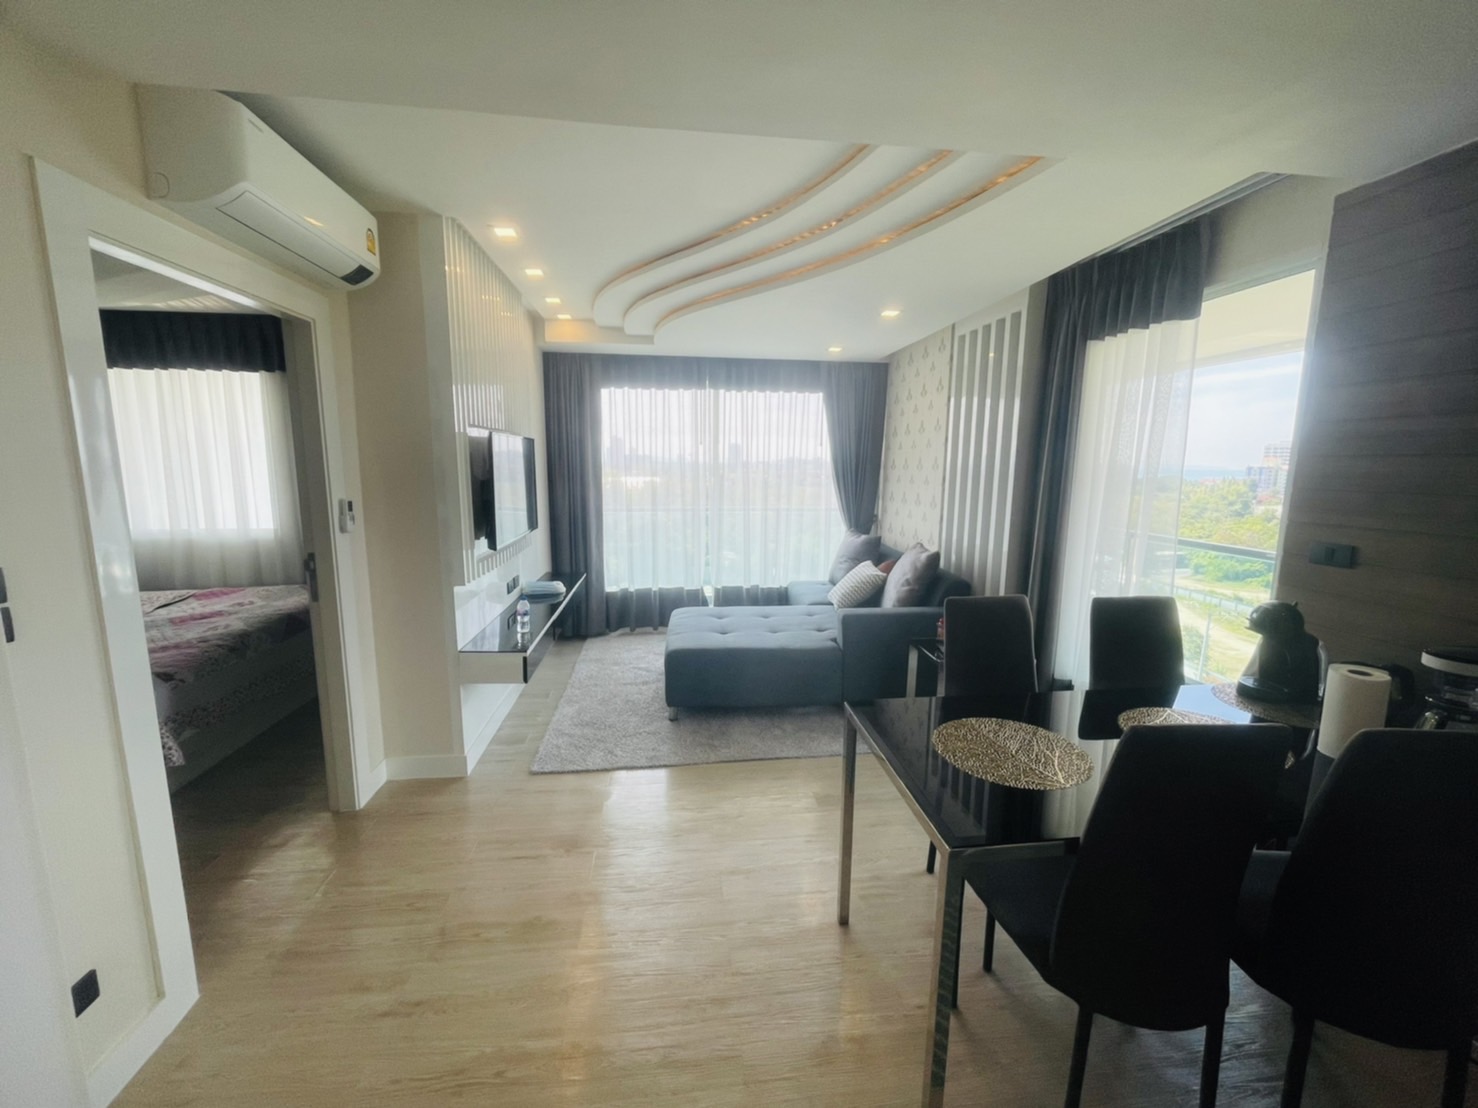 R139 The Feelture Najomtien Large 1 bedroom 60 sqm Rental price 17,000 baht/month 1 Year